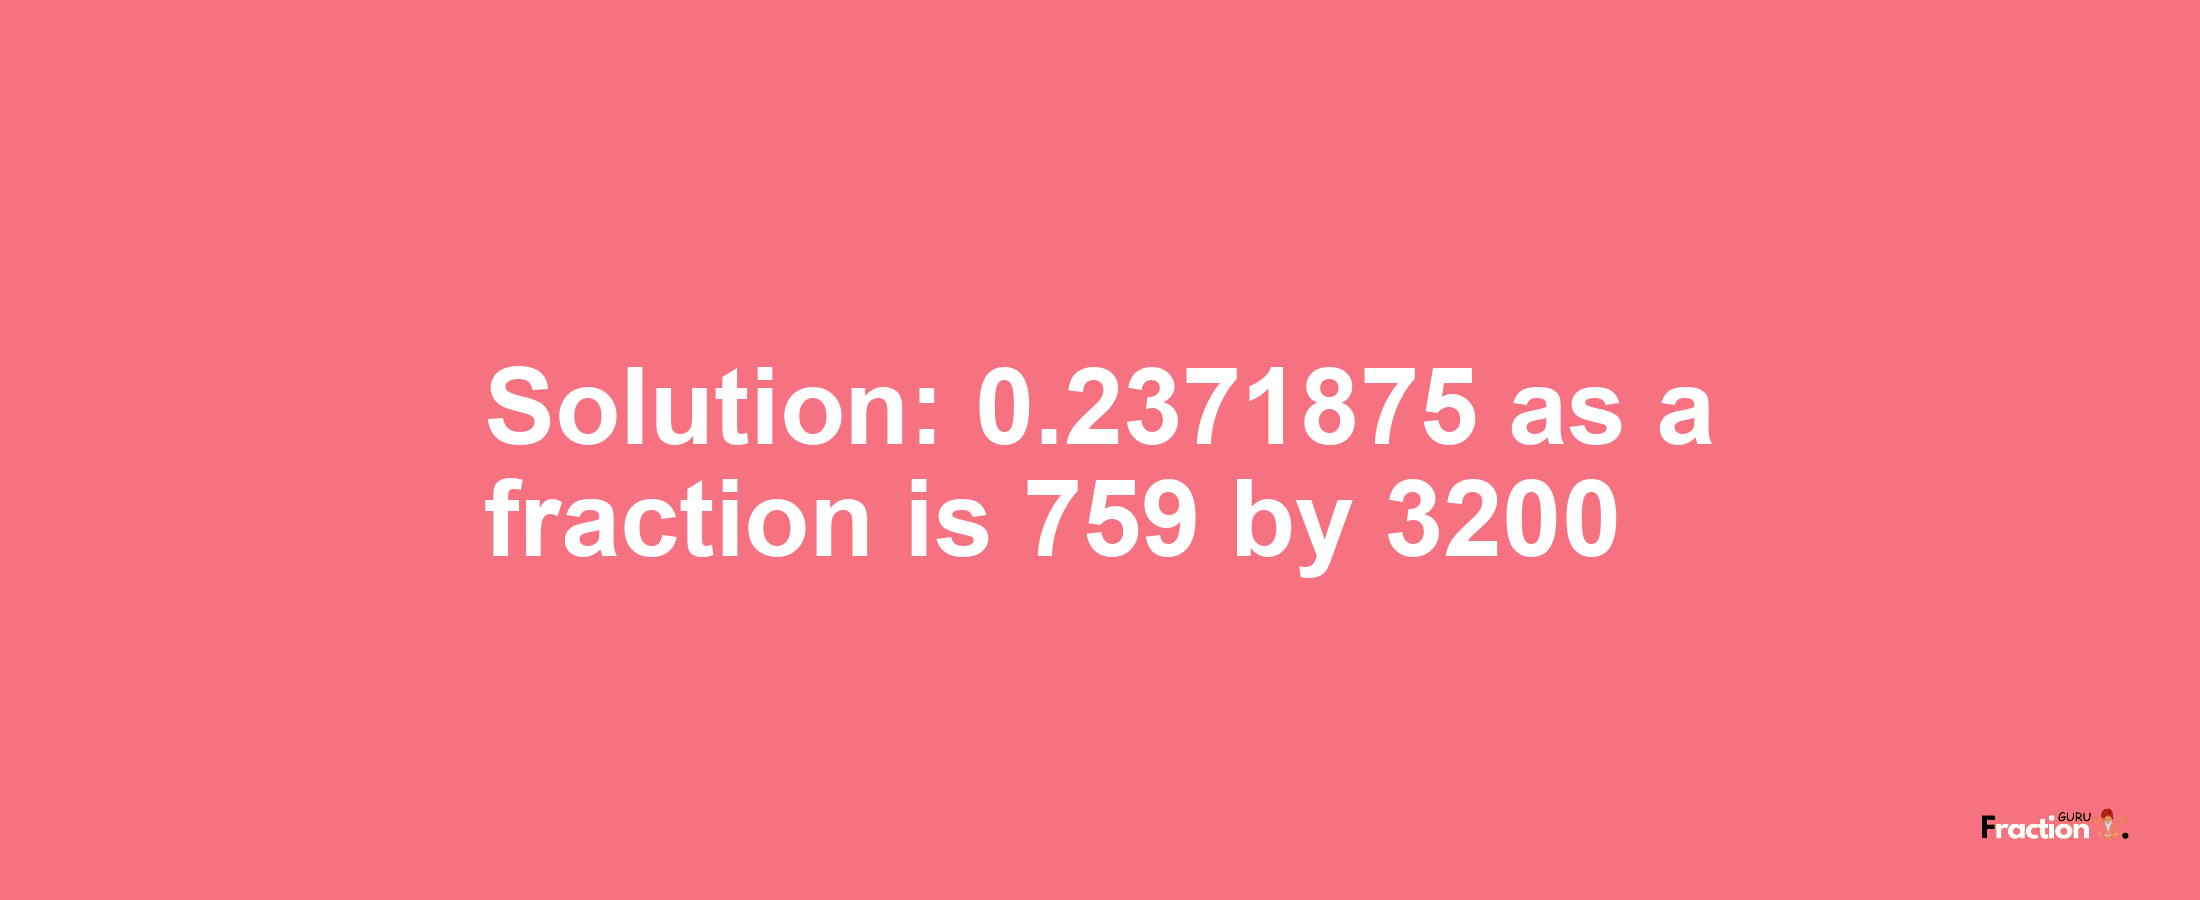 Solution:0.2371875 as a fraction is 759/3200